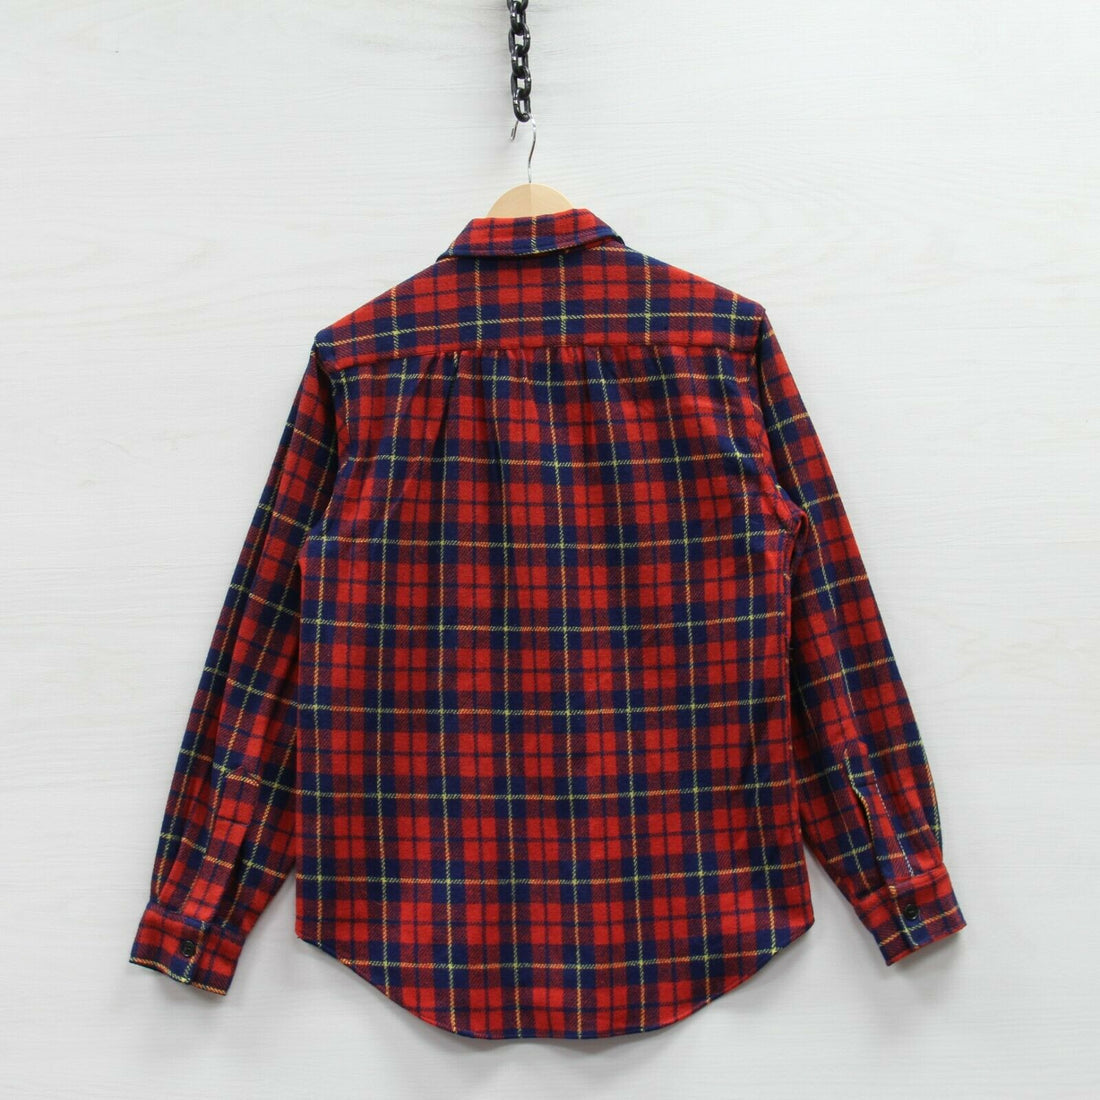 Vintage Mac Taggart Wool Button Up Shirt Size 2 Plaid Long Sleeve